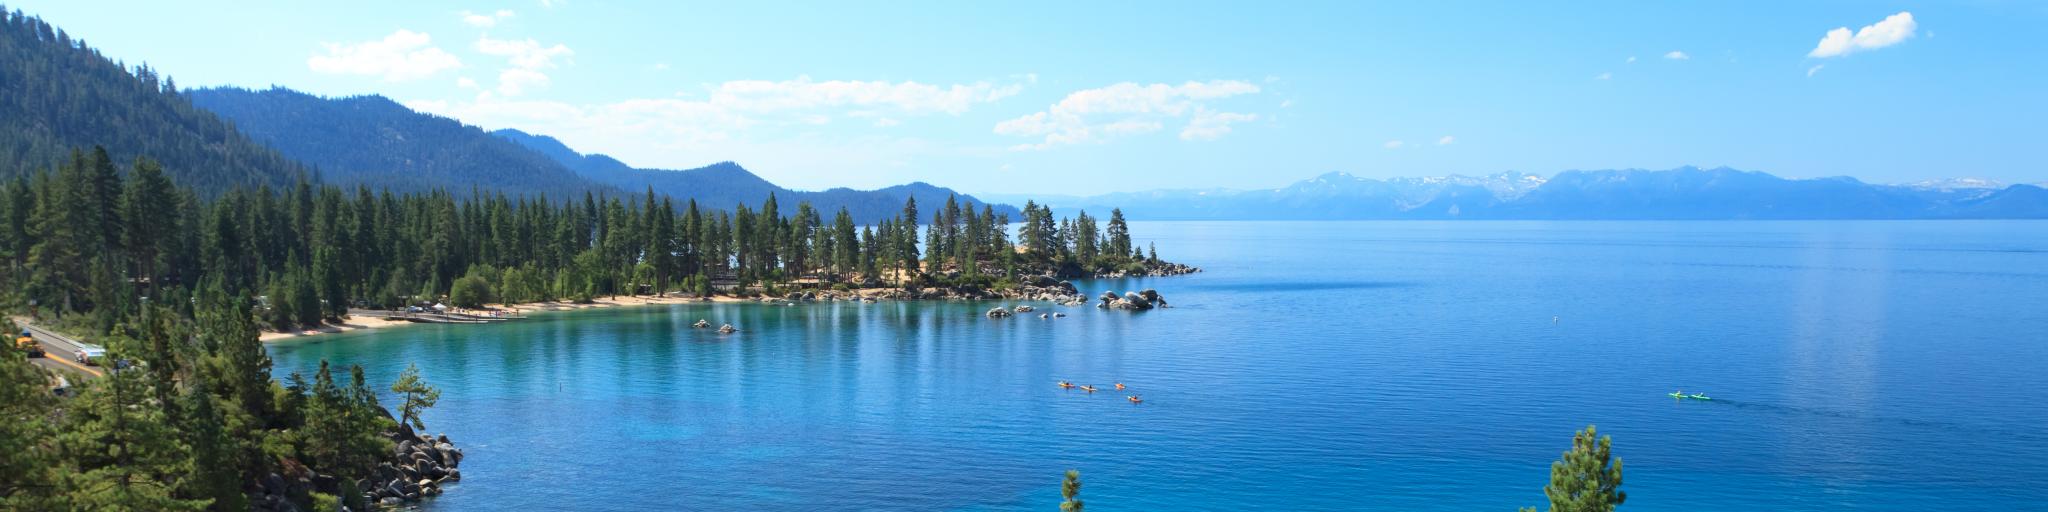 Crystal clear still waters and boulder beach of Lake Tahoe in California